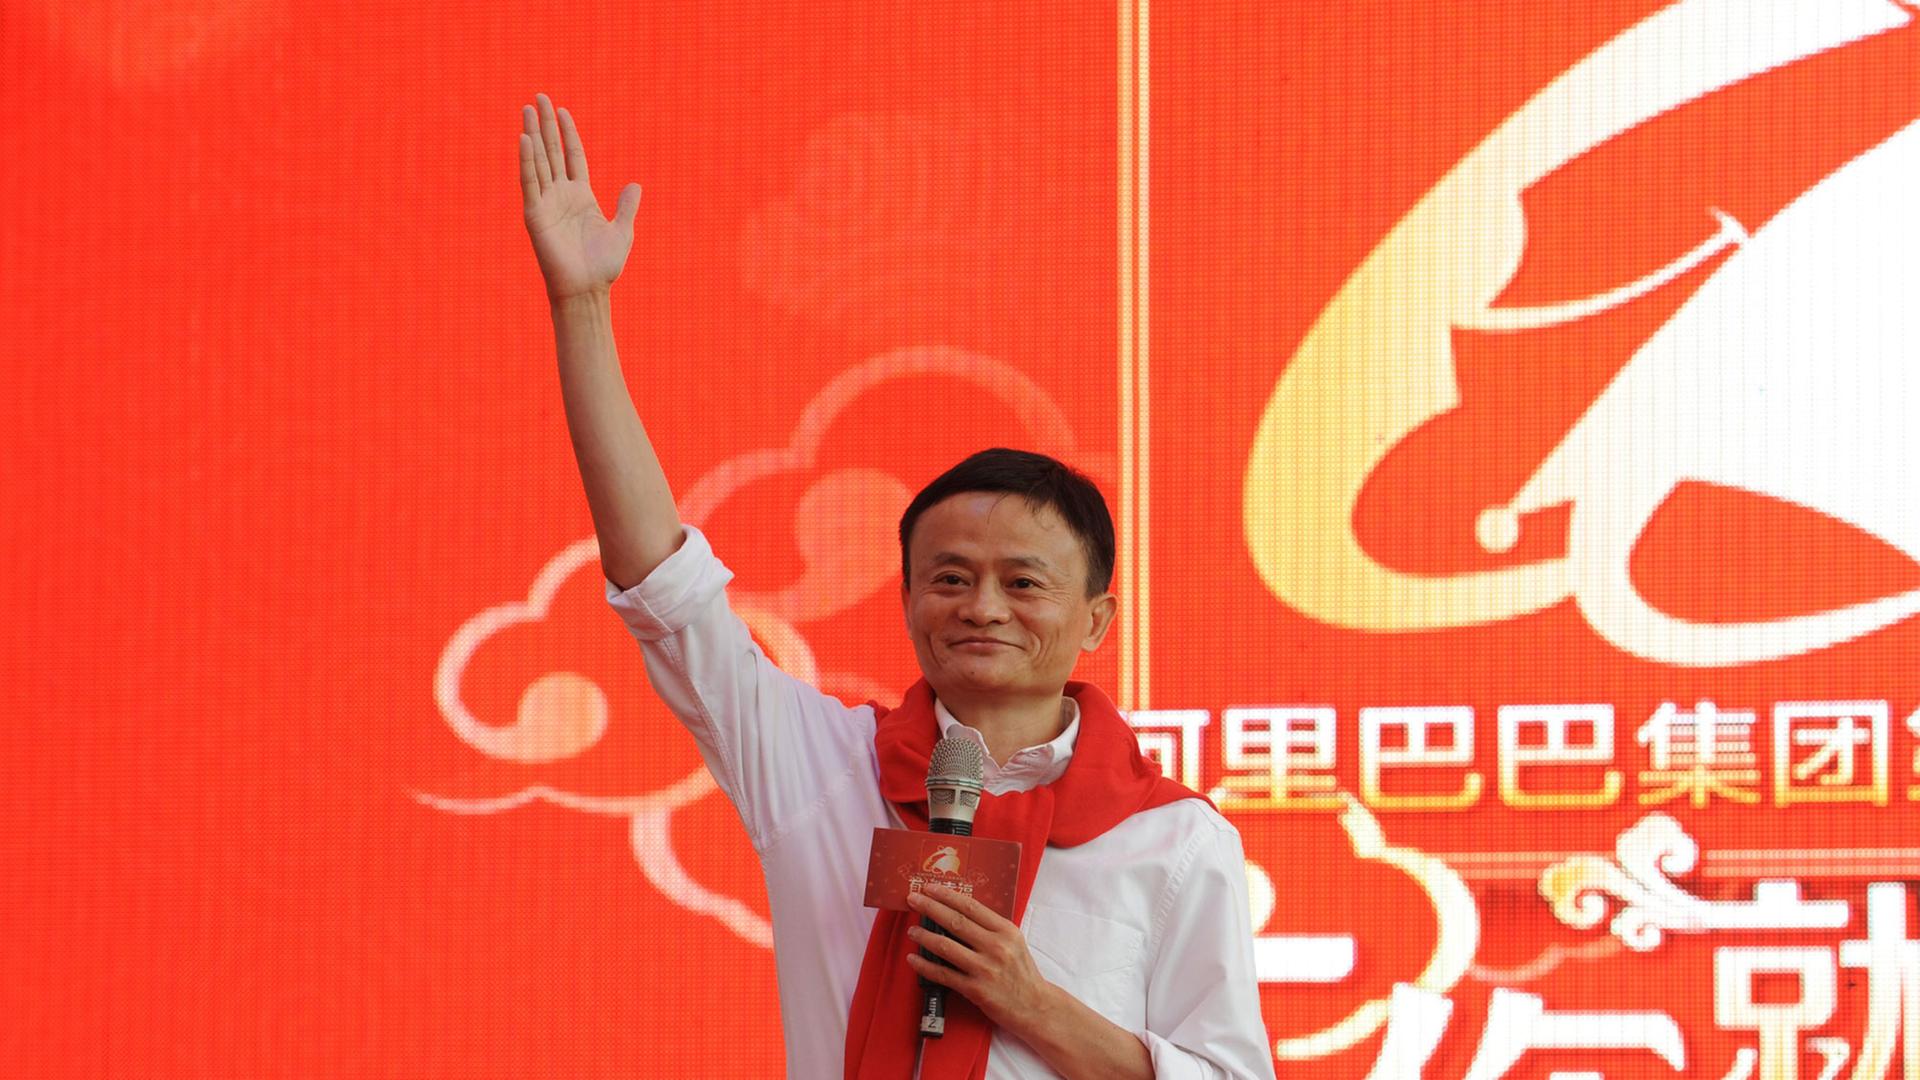 Jack Ma, chairman of Alibaba Group, witnesses a group wedding ceremony on May 9, 2014 in Hangzhou, Zhejiang Province of China